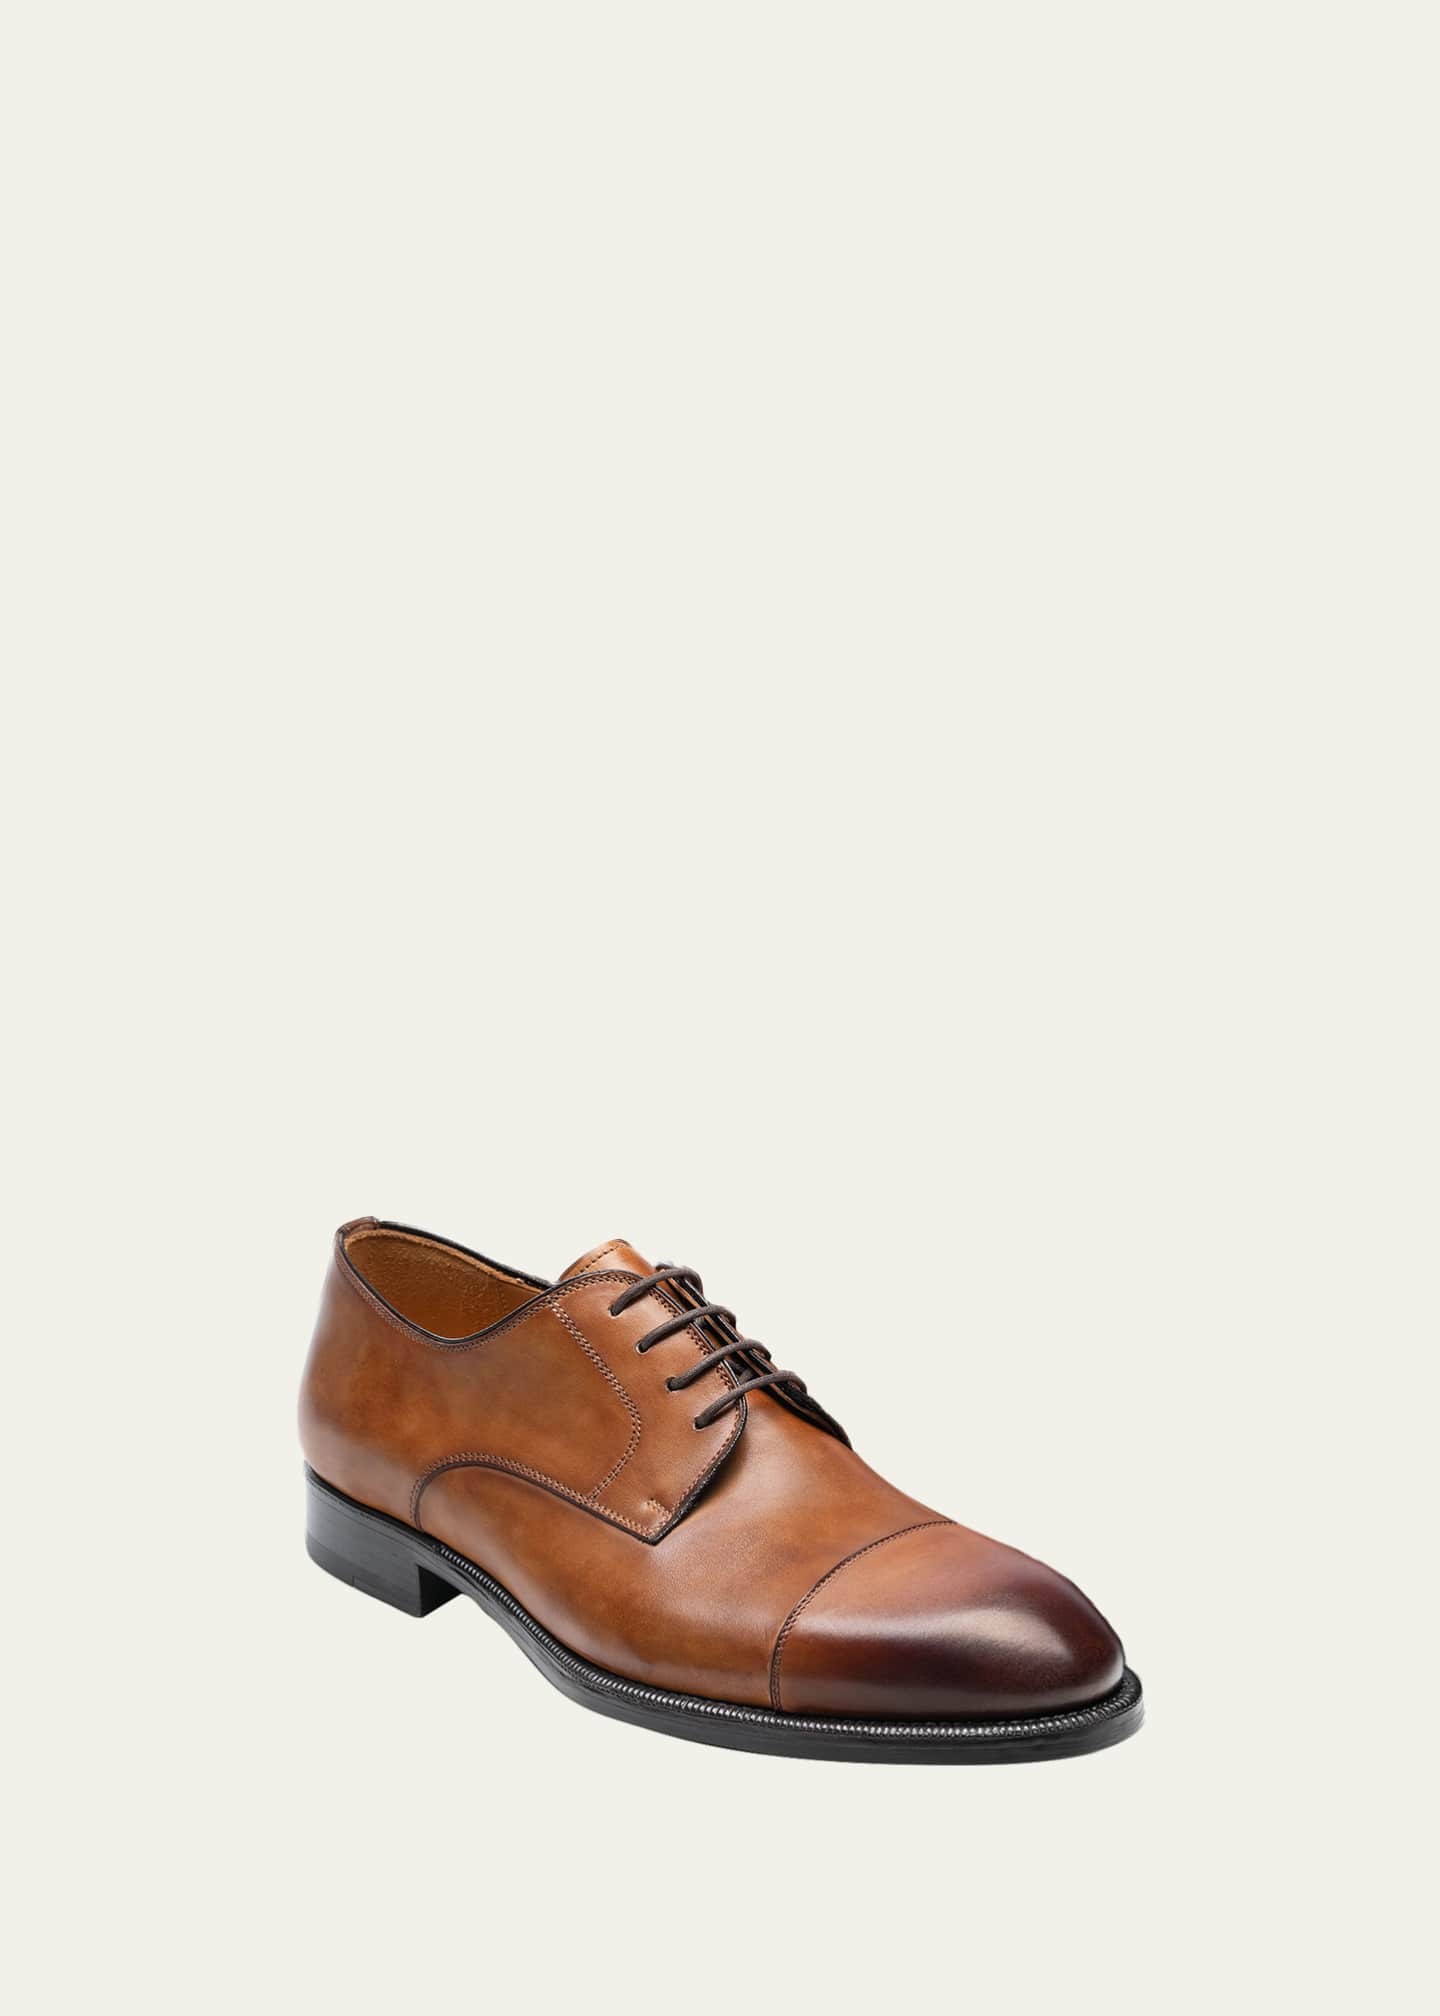 Magnanni Men's Harlan Rubber Sole Leather Derby Shoes - Bergdorf Goodman